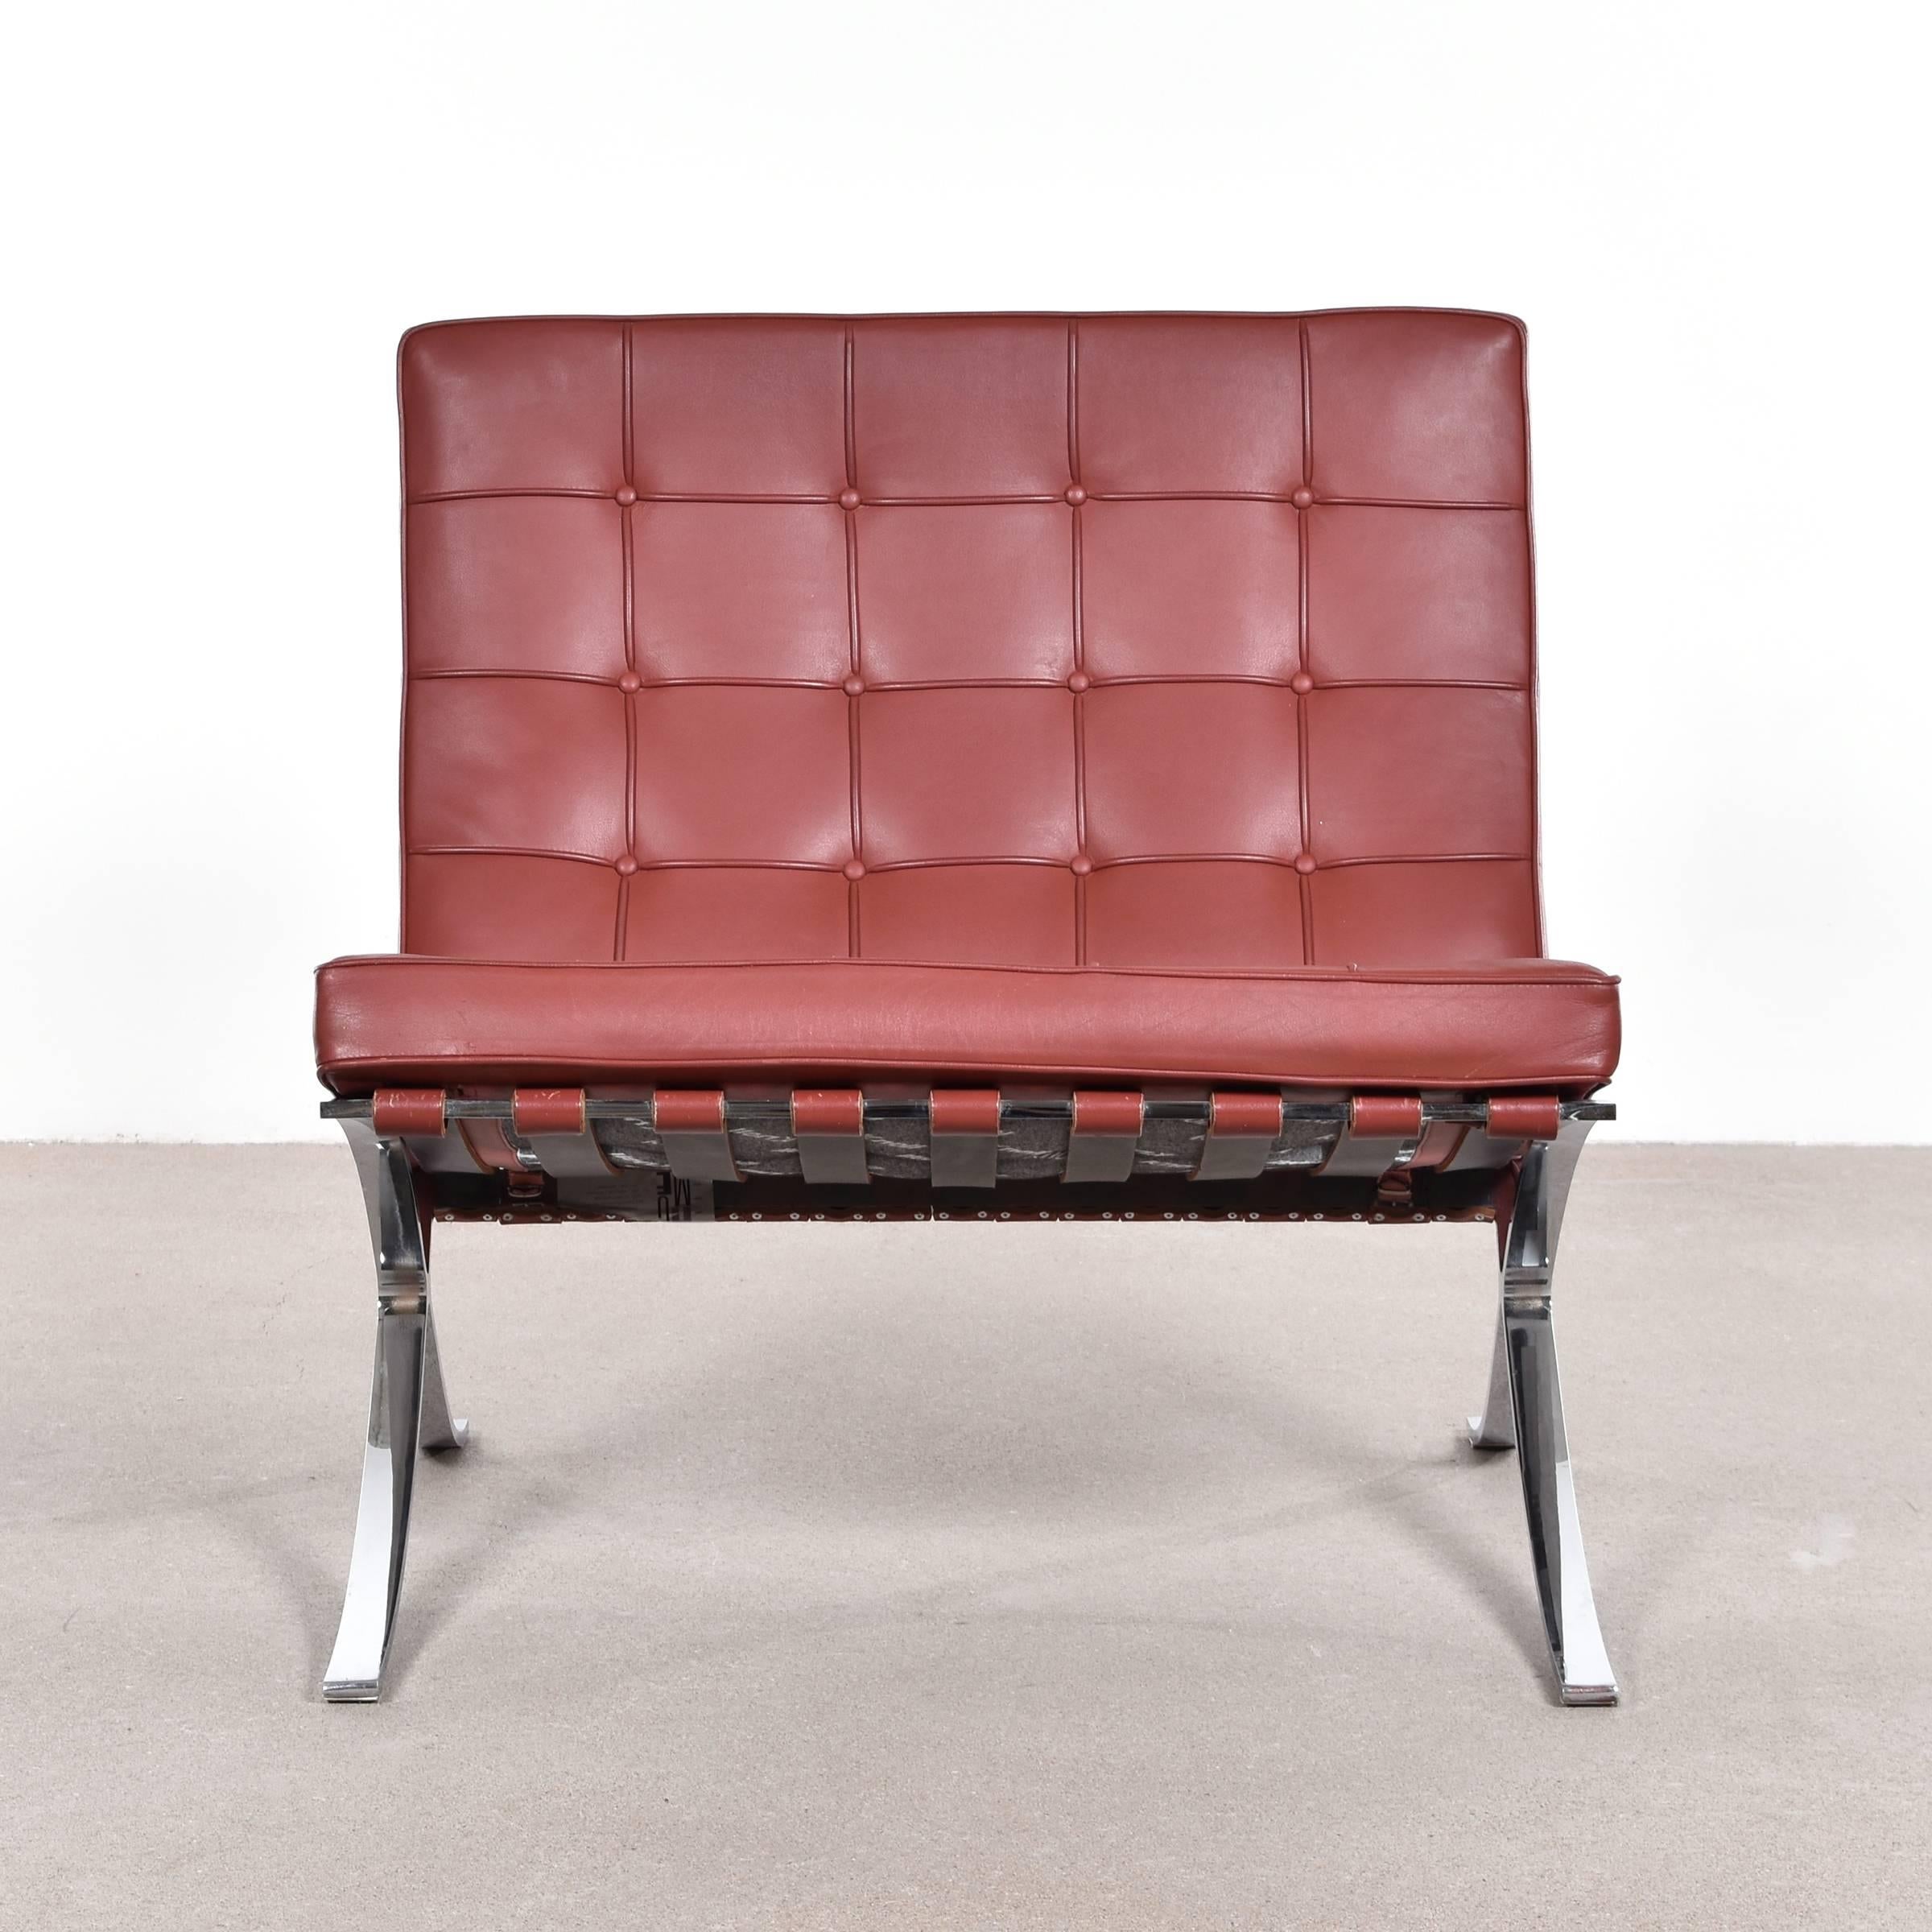 Iconic and famous Ludwig Mies van der Rohe Barcelona lounge chair. Very good original condition with red brown leather. Signed with manufacturer's label and engraving. Currently 2 chairs available.

Free shipping for European destinations!

We